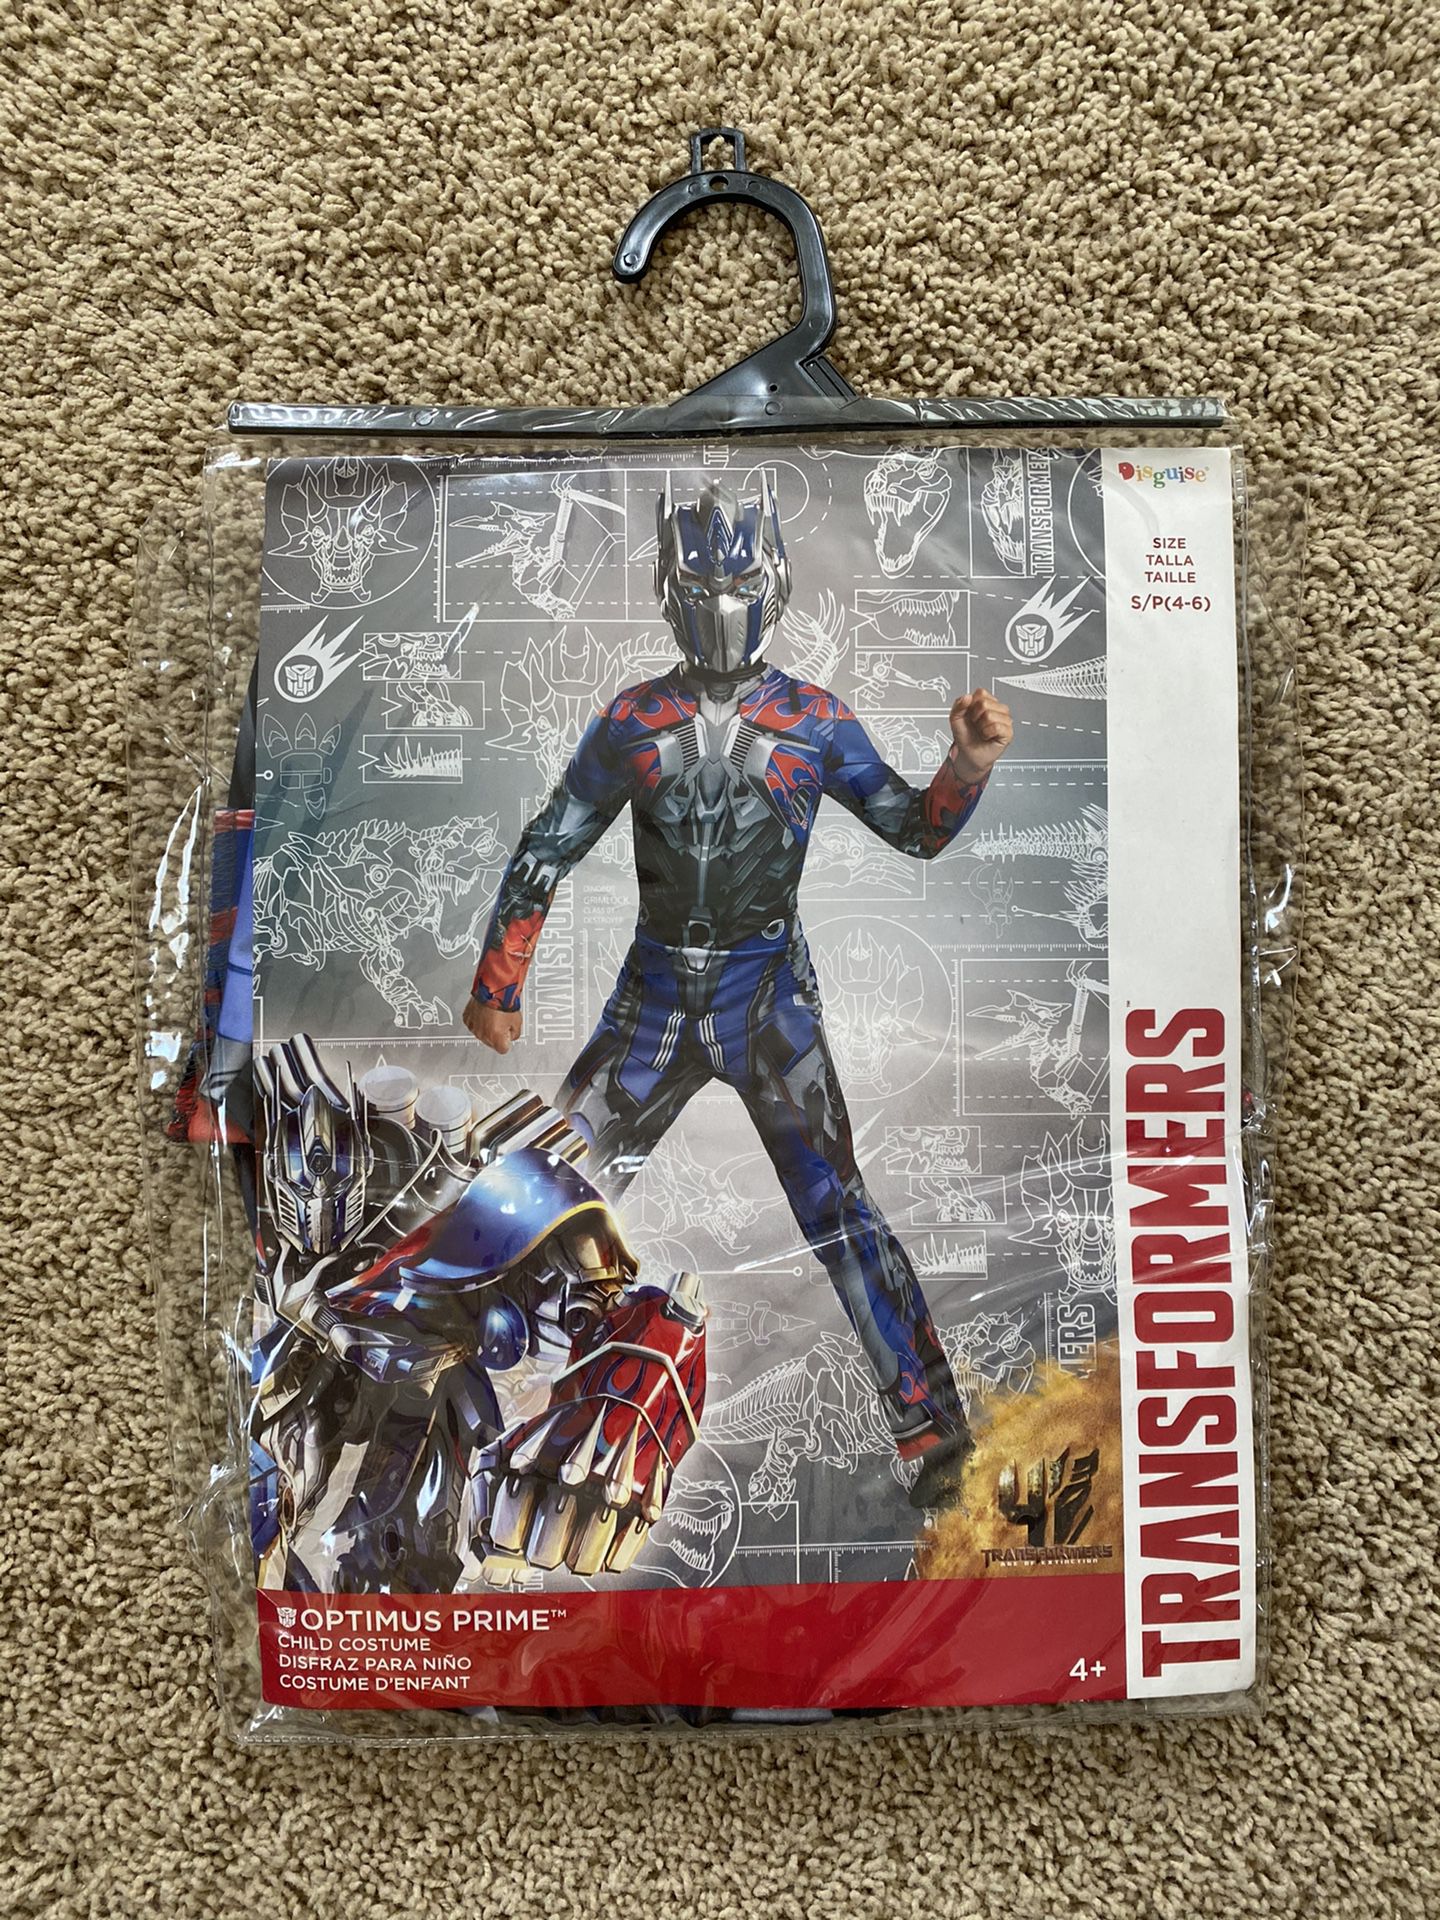 Transformers OPTIMUS PRIME Costume youth/kidssize S/P (4-6)